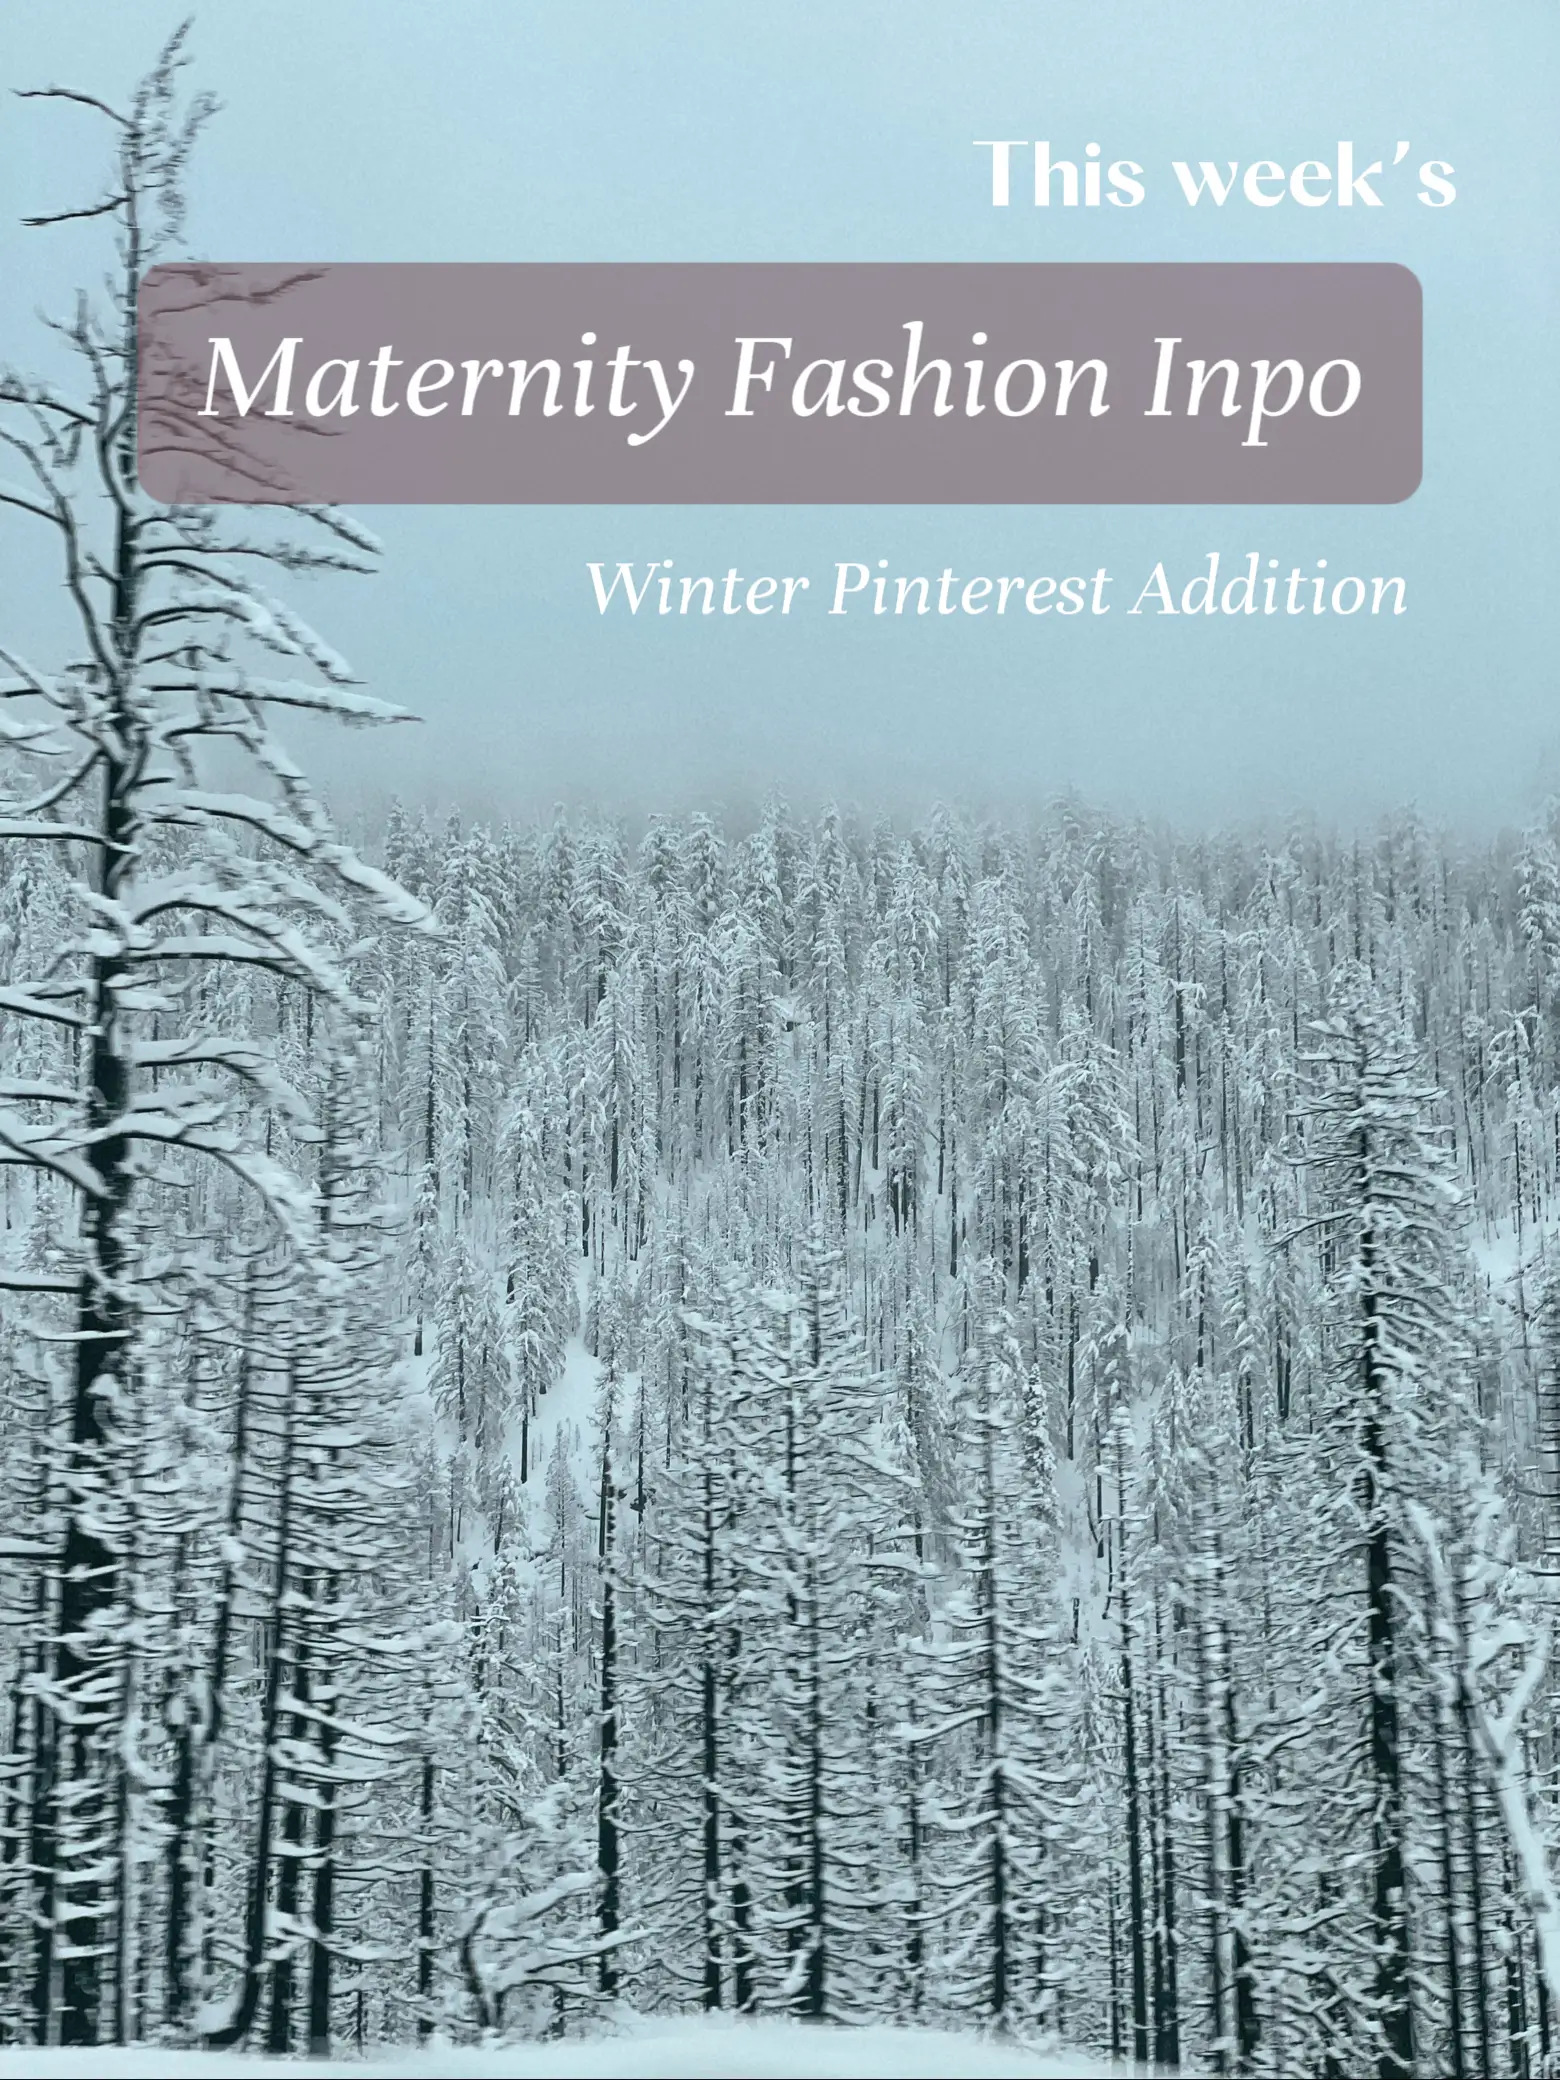 WINTER MATERNITY FASHION INSPO FROM PINTEREST, Gallery posted by Elise